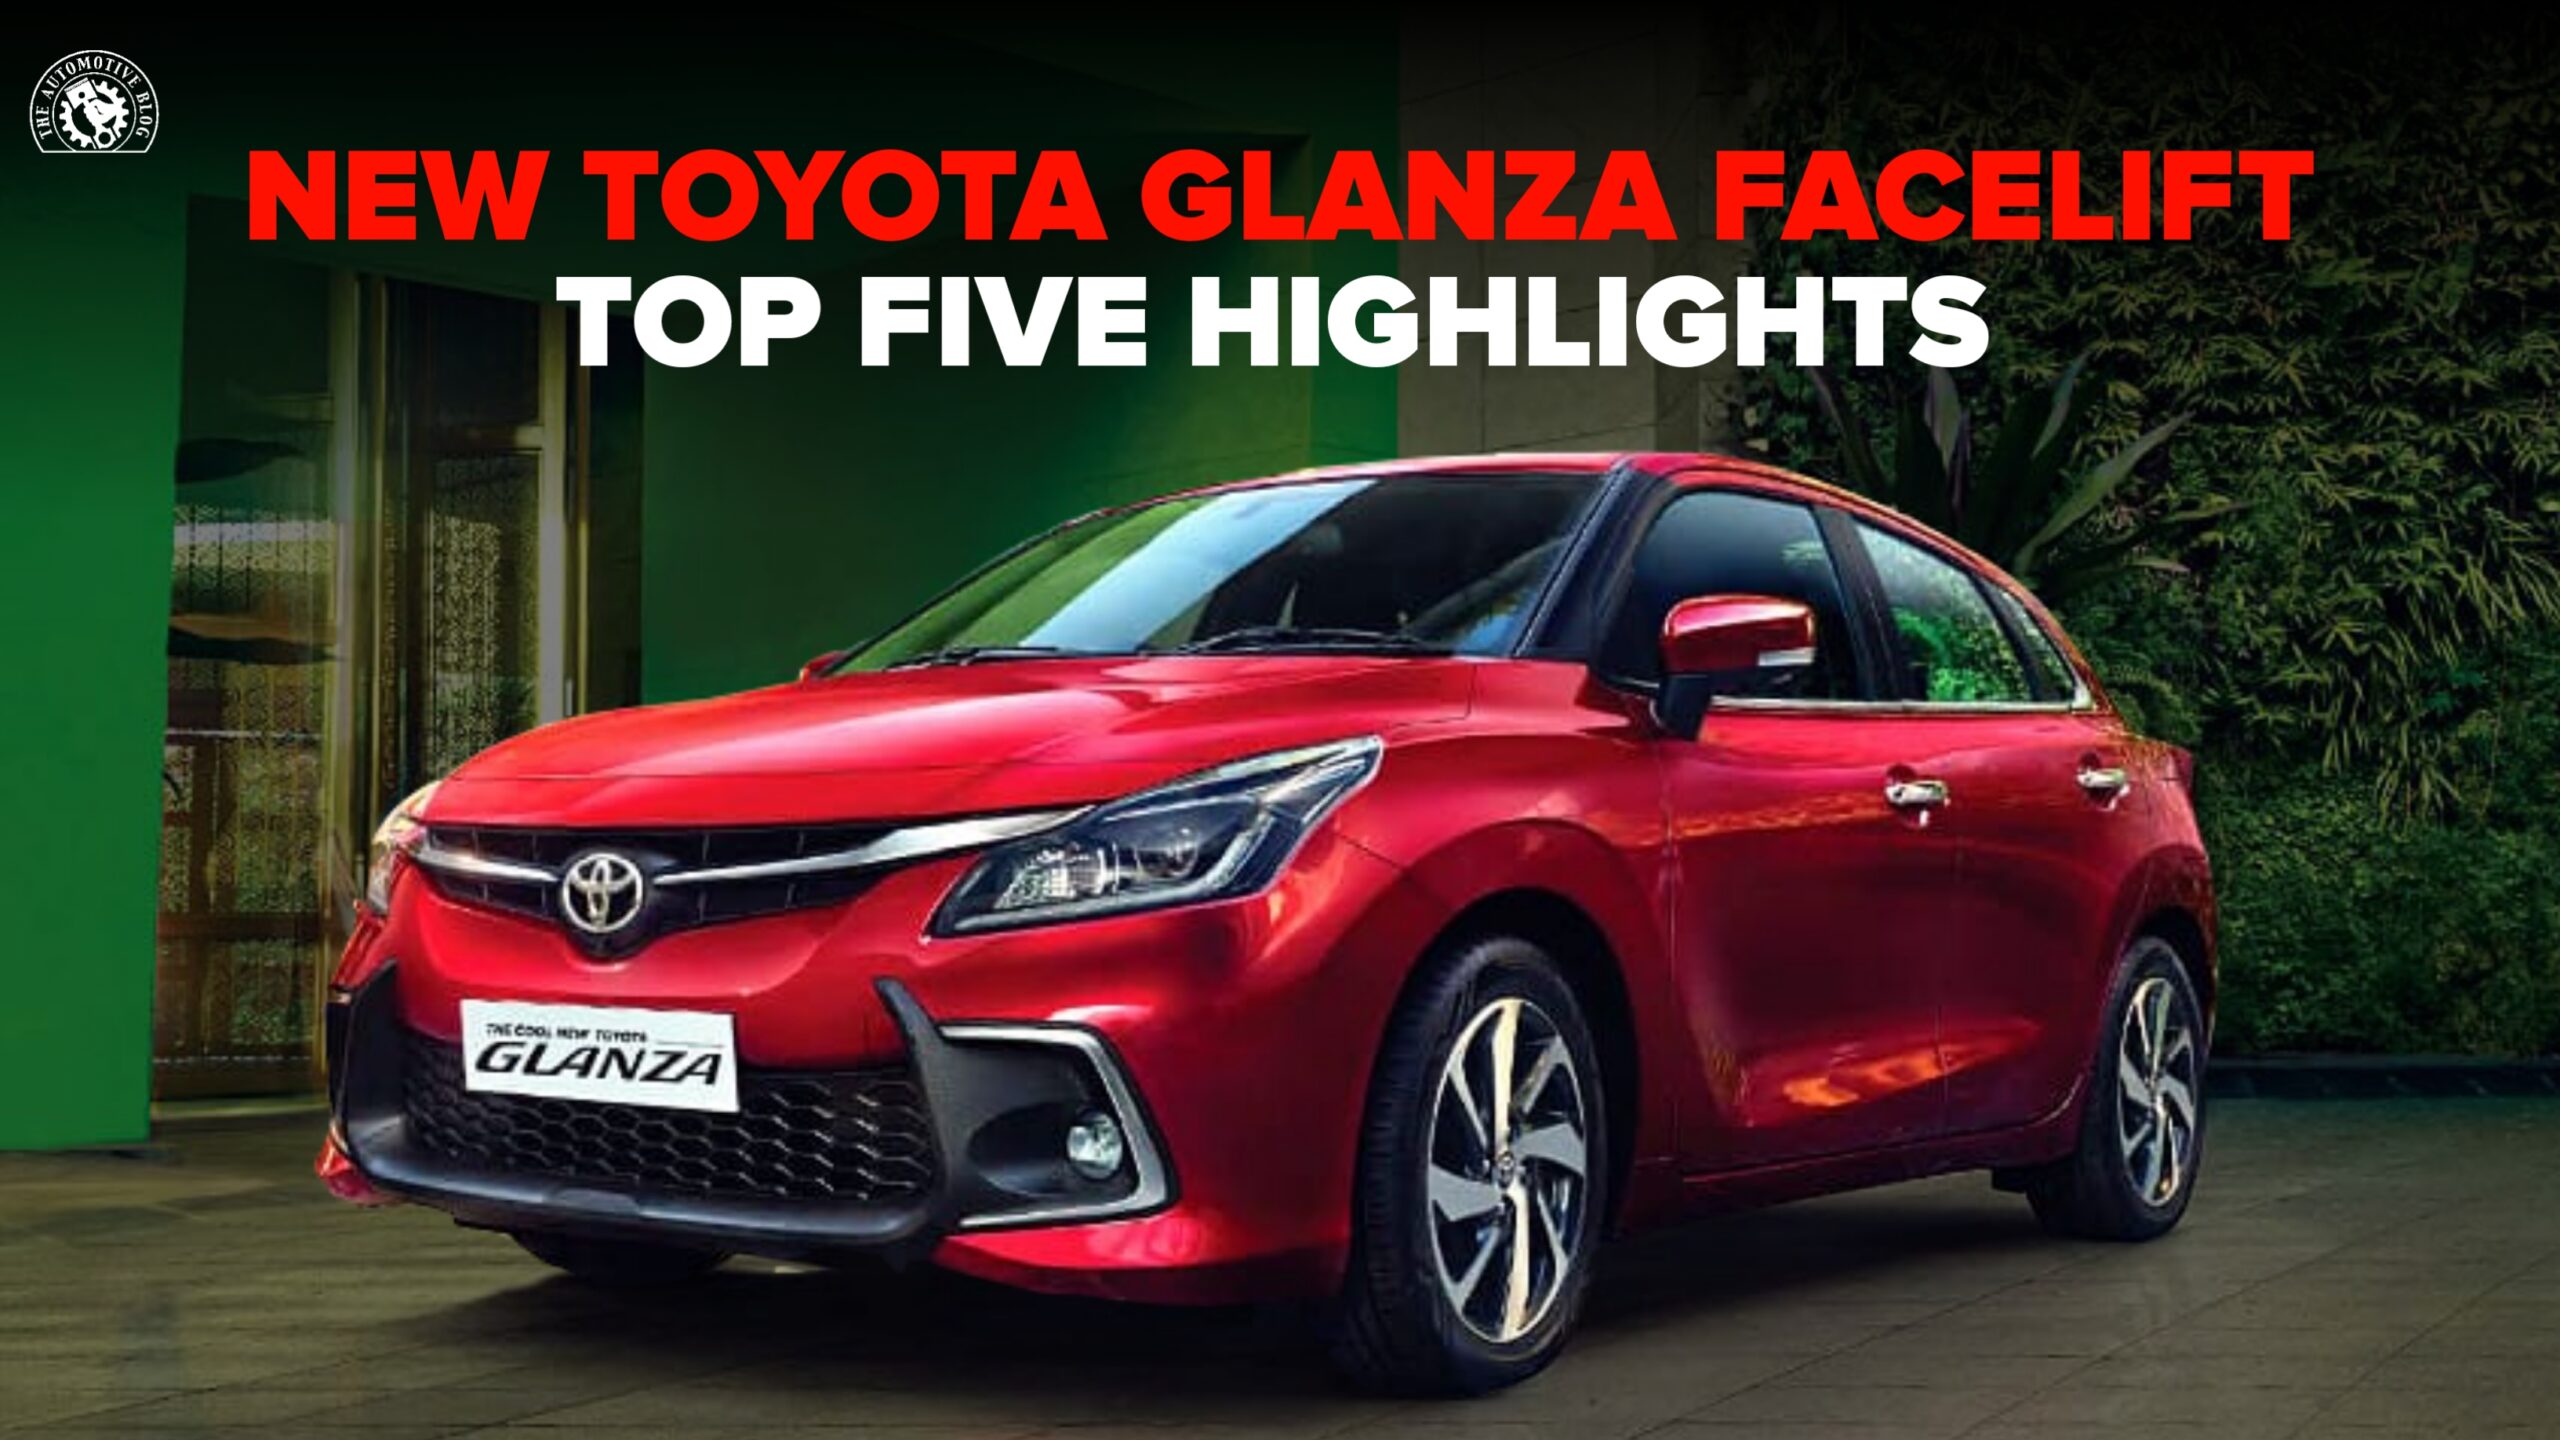 New Toyota Glanza Facelift - Top Five Highlights